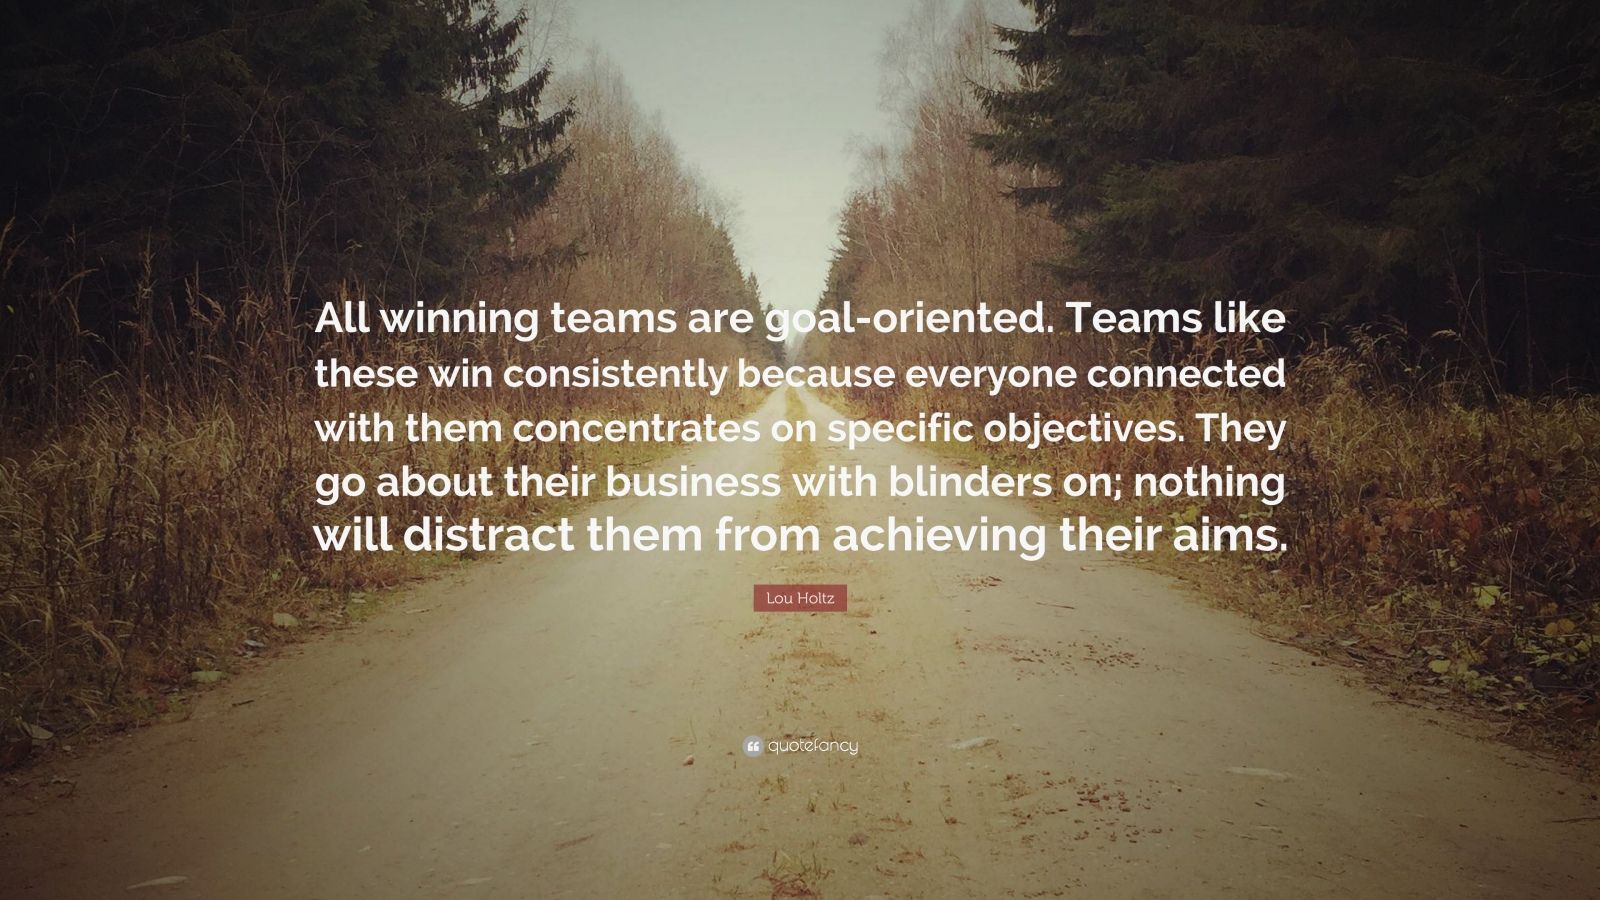 Lou Holtz Quote: “All winning teams are goal-oriented. Teams like these